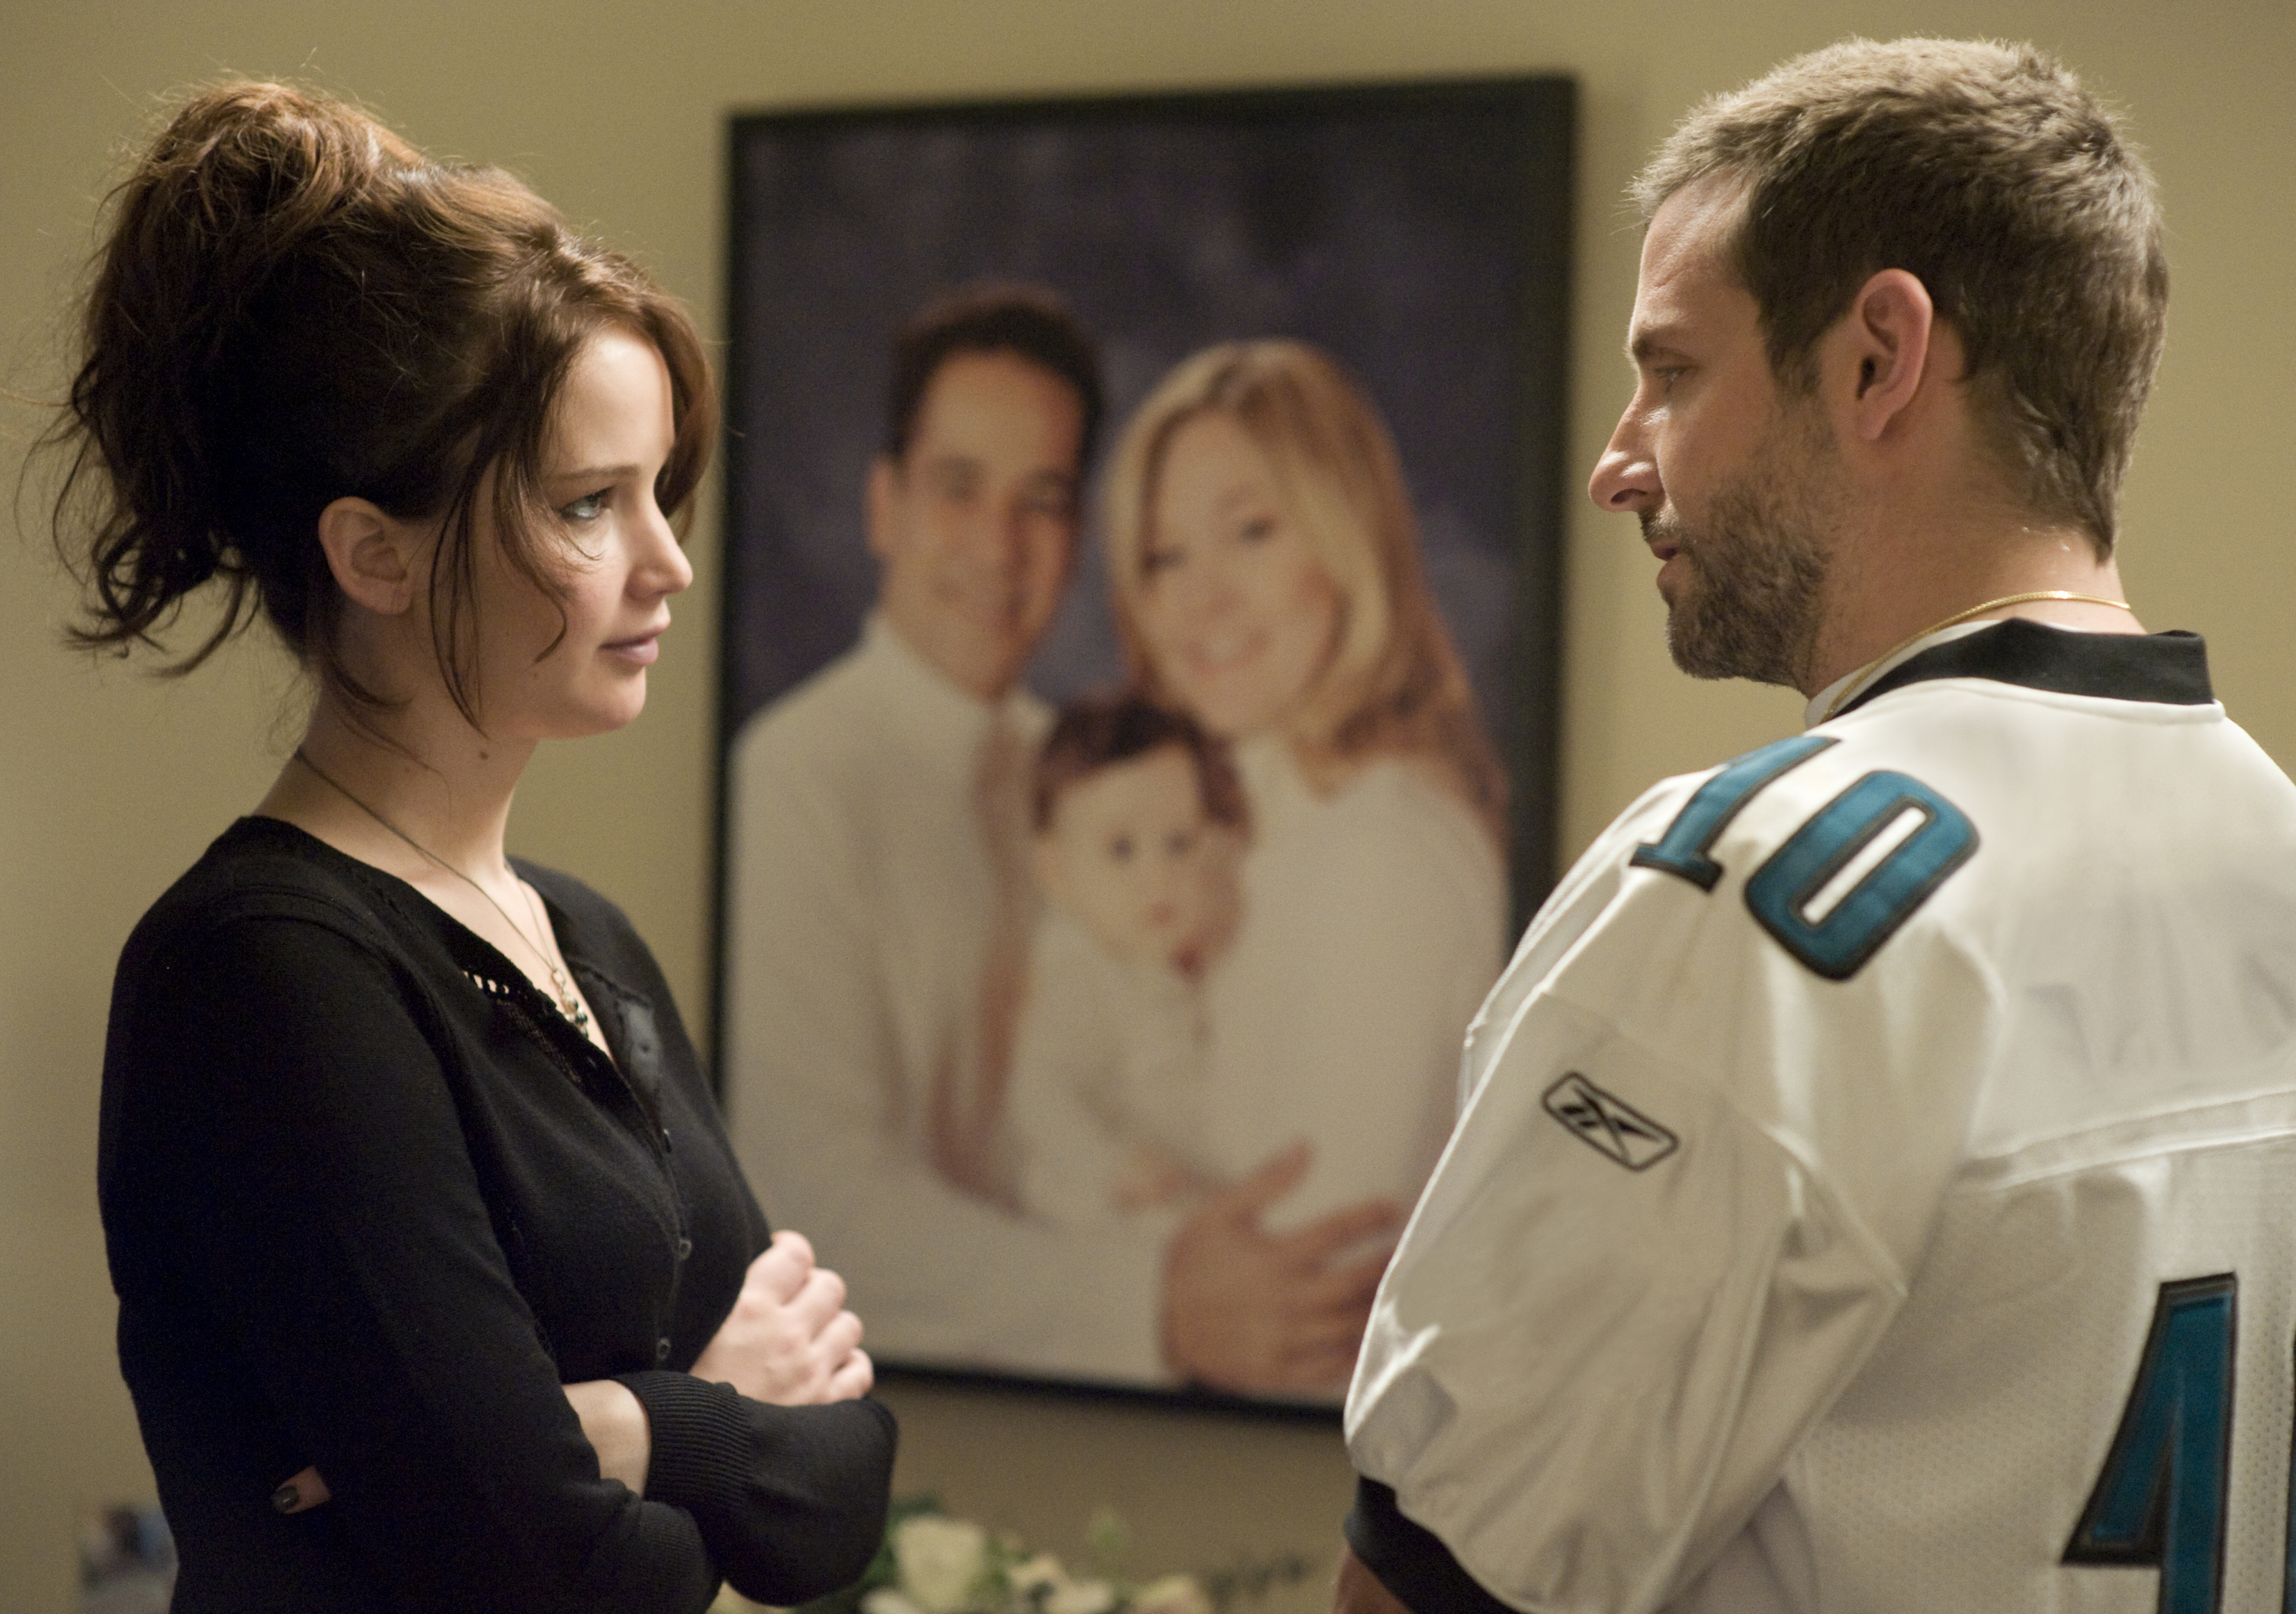 Silver Linings Playbook Backgrounds, Compatible - PC, Mobile, Gadgets| 3000x2109 px